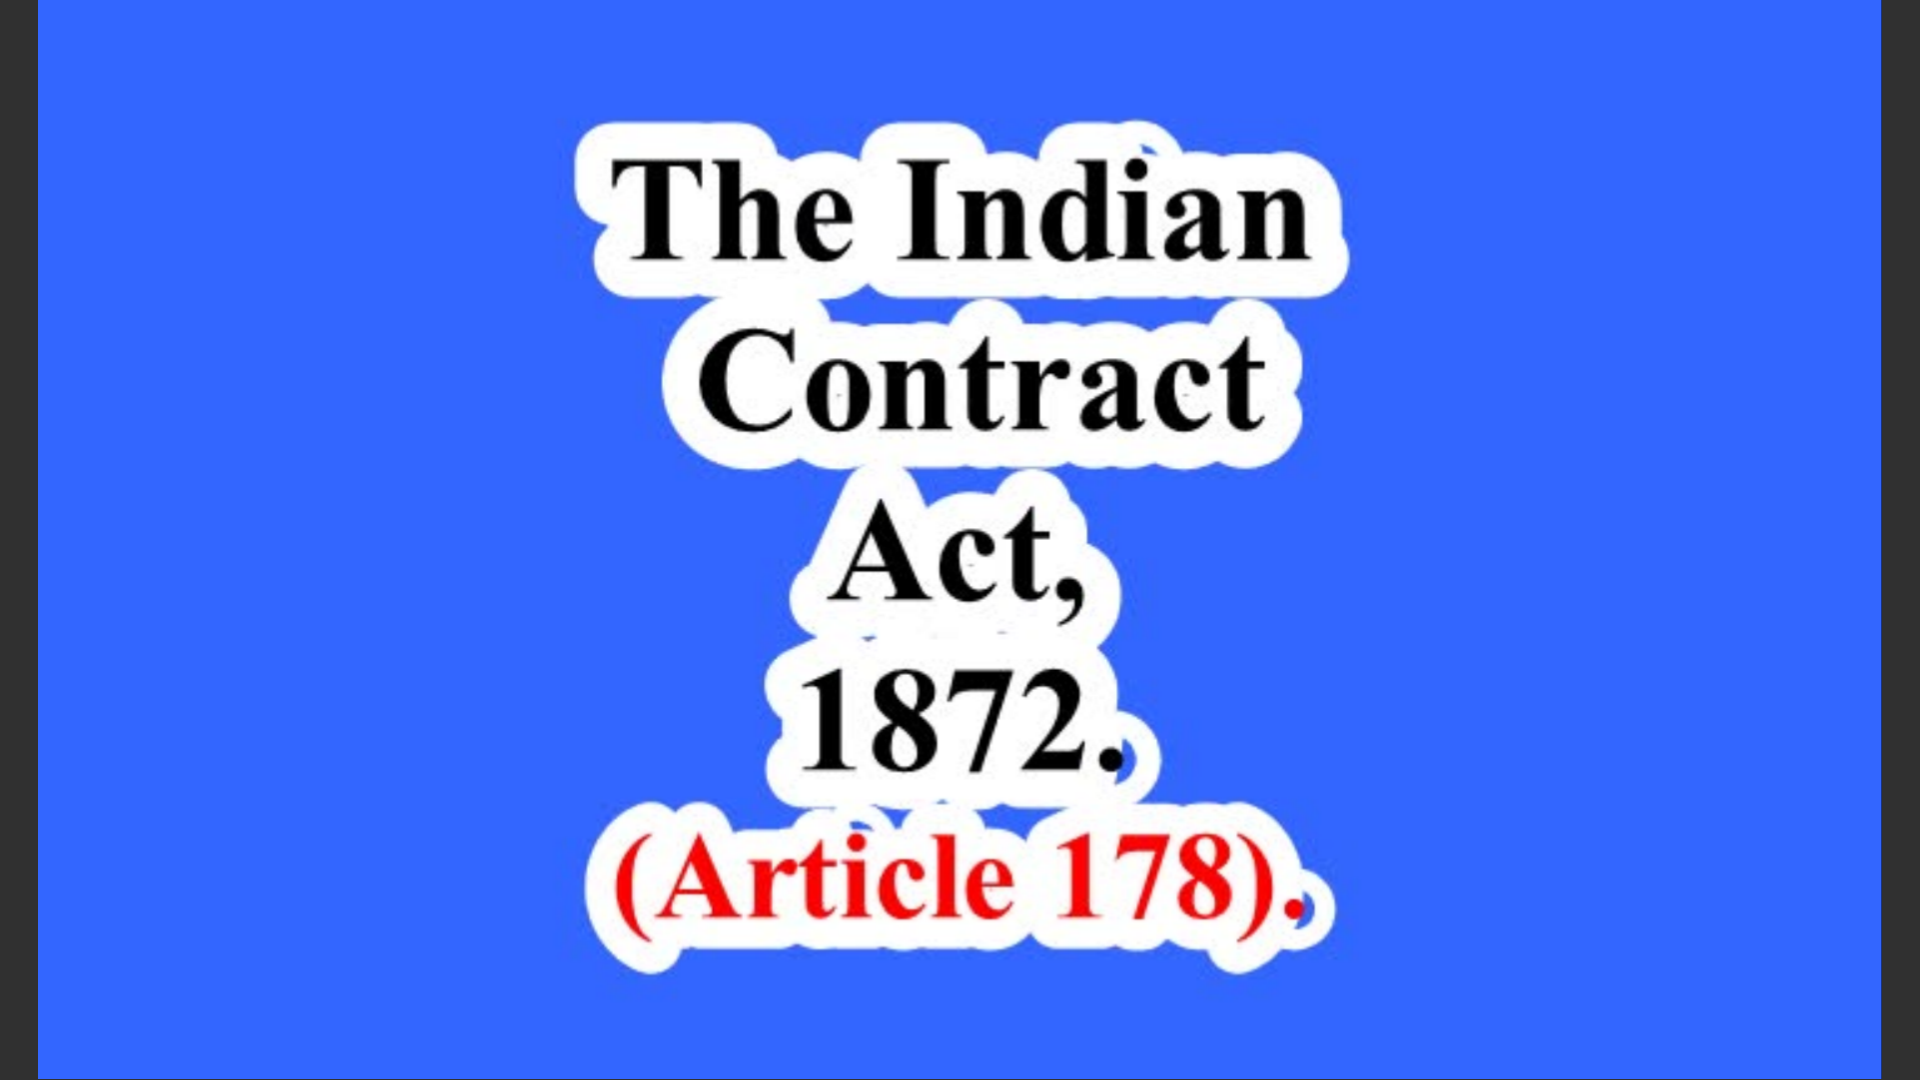 The Indian Contract Act, 1872. (Article 178).